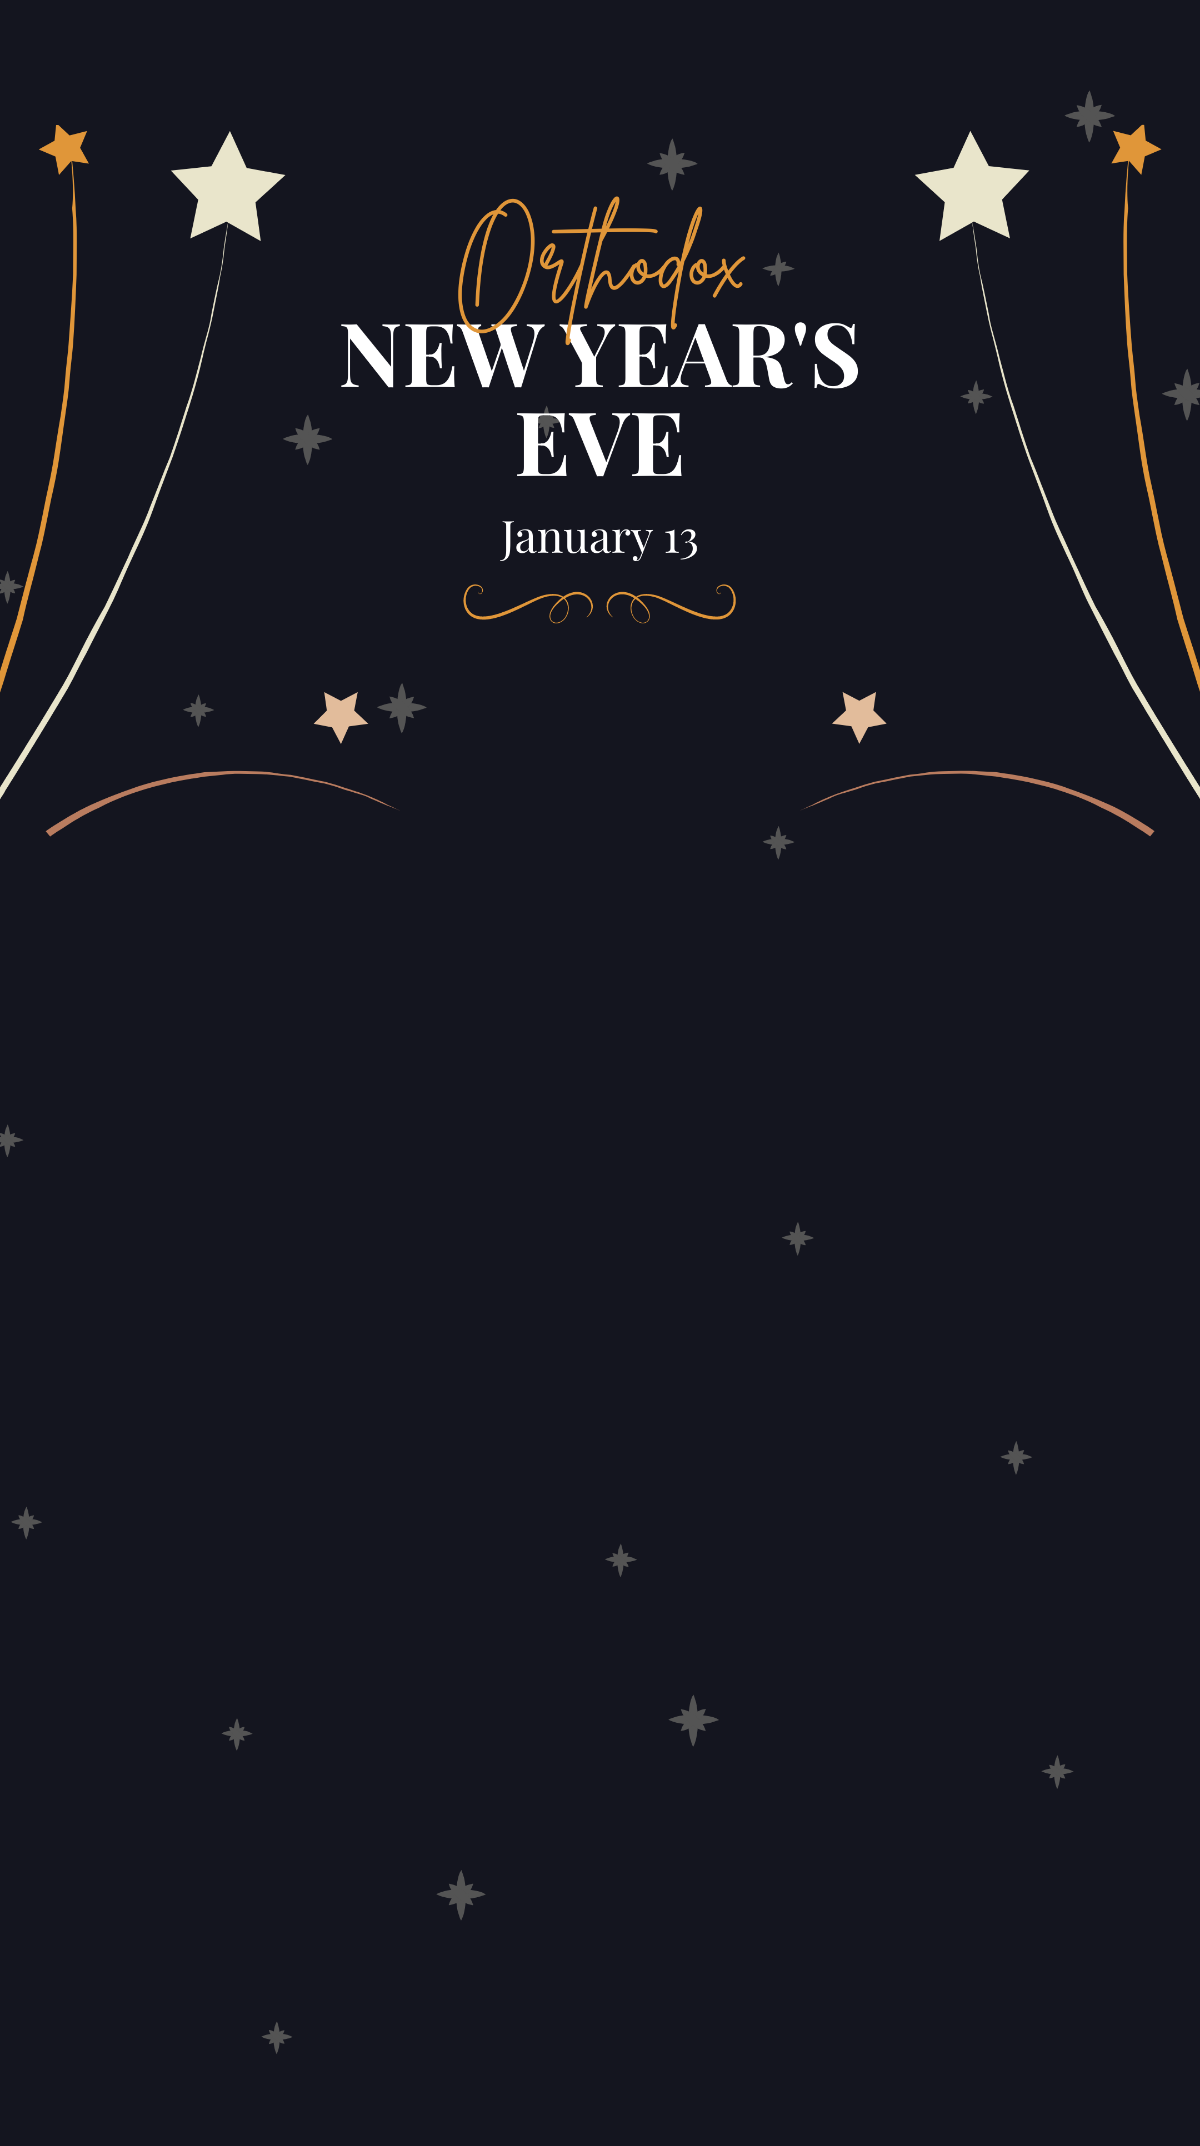 Free Orthodox New Year Eve Snapchat Geofilter Template